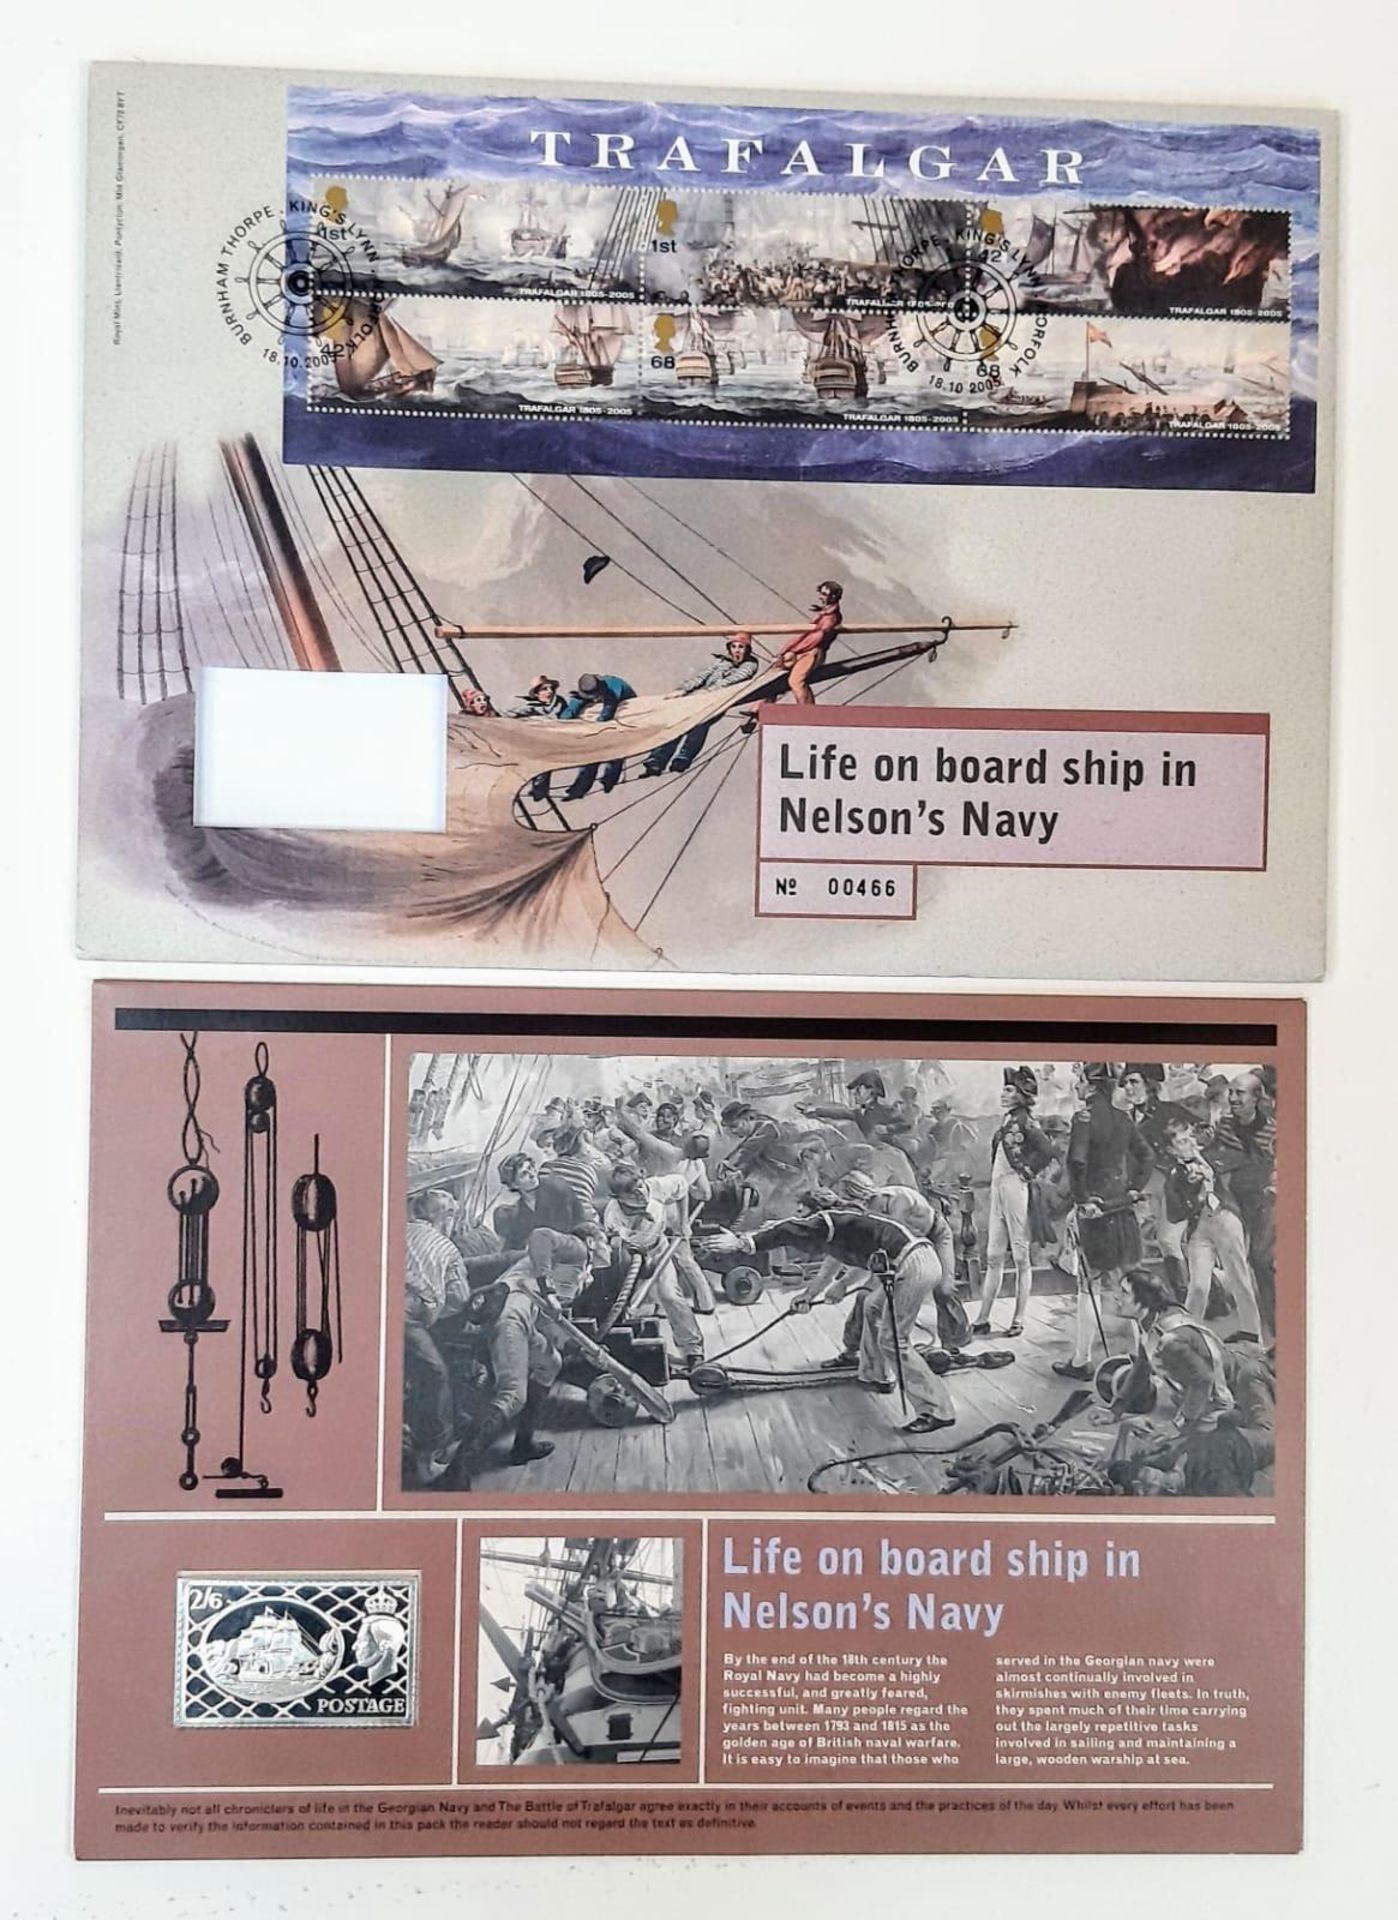 A Sterling Silver, Limited Edition, 2005 Commemorative Ingot of Life on Board Nelson’s Navy. In